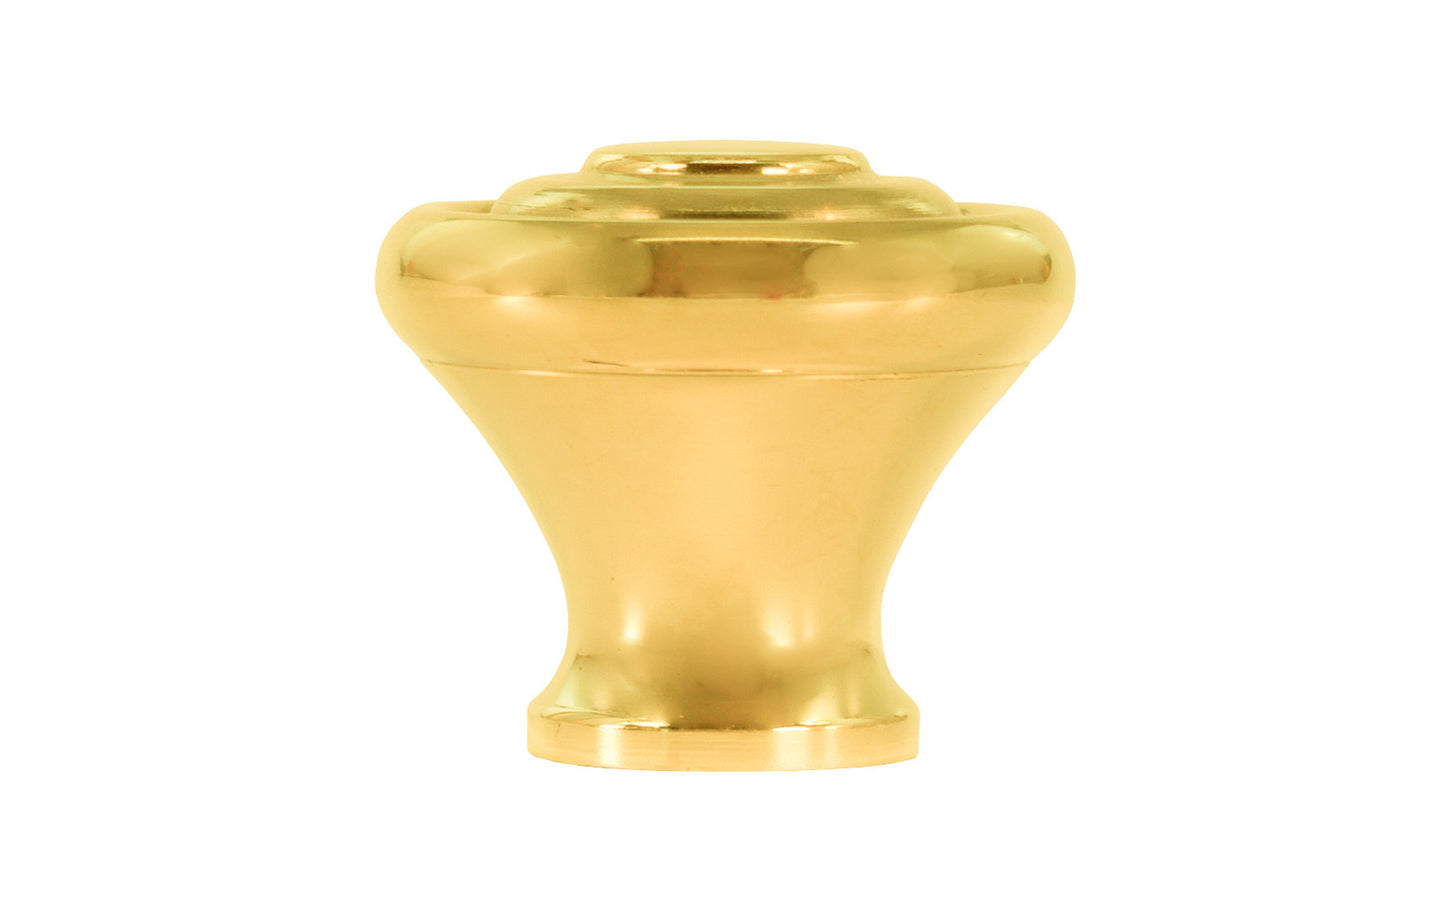 Classic "Art Deco" style cabinet round knob with a retro 1930's look. It has a round smooth shape with ring steps on the top. Made of high quality solid brass. Designed in the 1930's, Streamline Moderne, Art Deco style. 1-3/16" diameter. Unlacquered brass (will patina naturally over time). Non-lacquered brass. Un-lacquered brass.